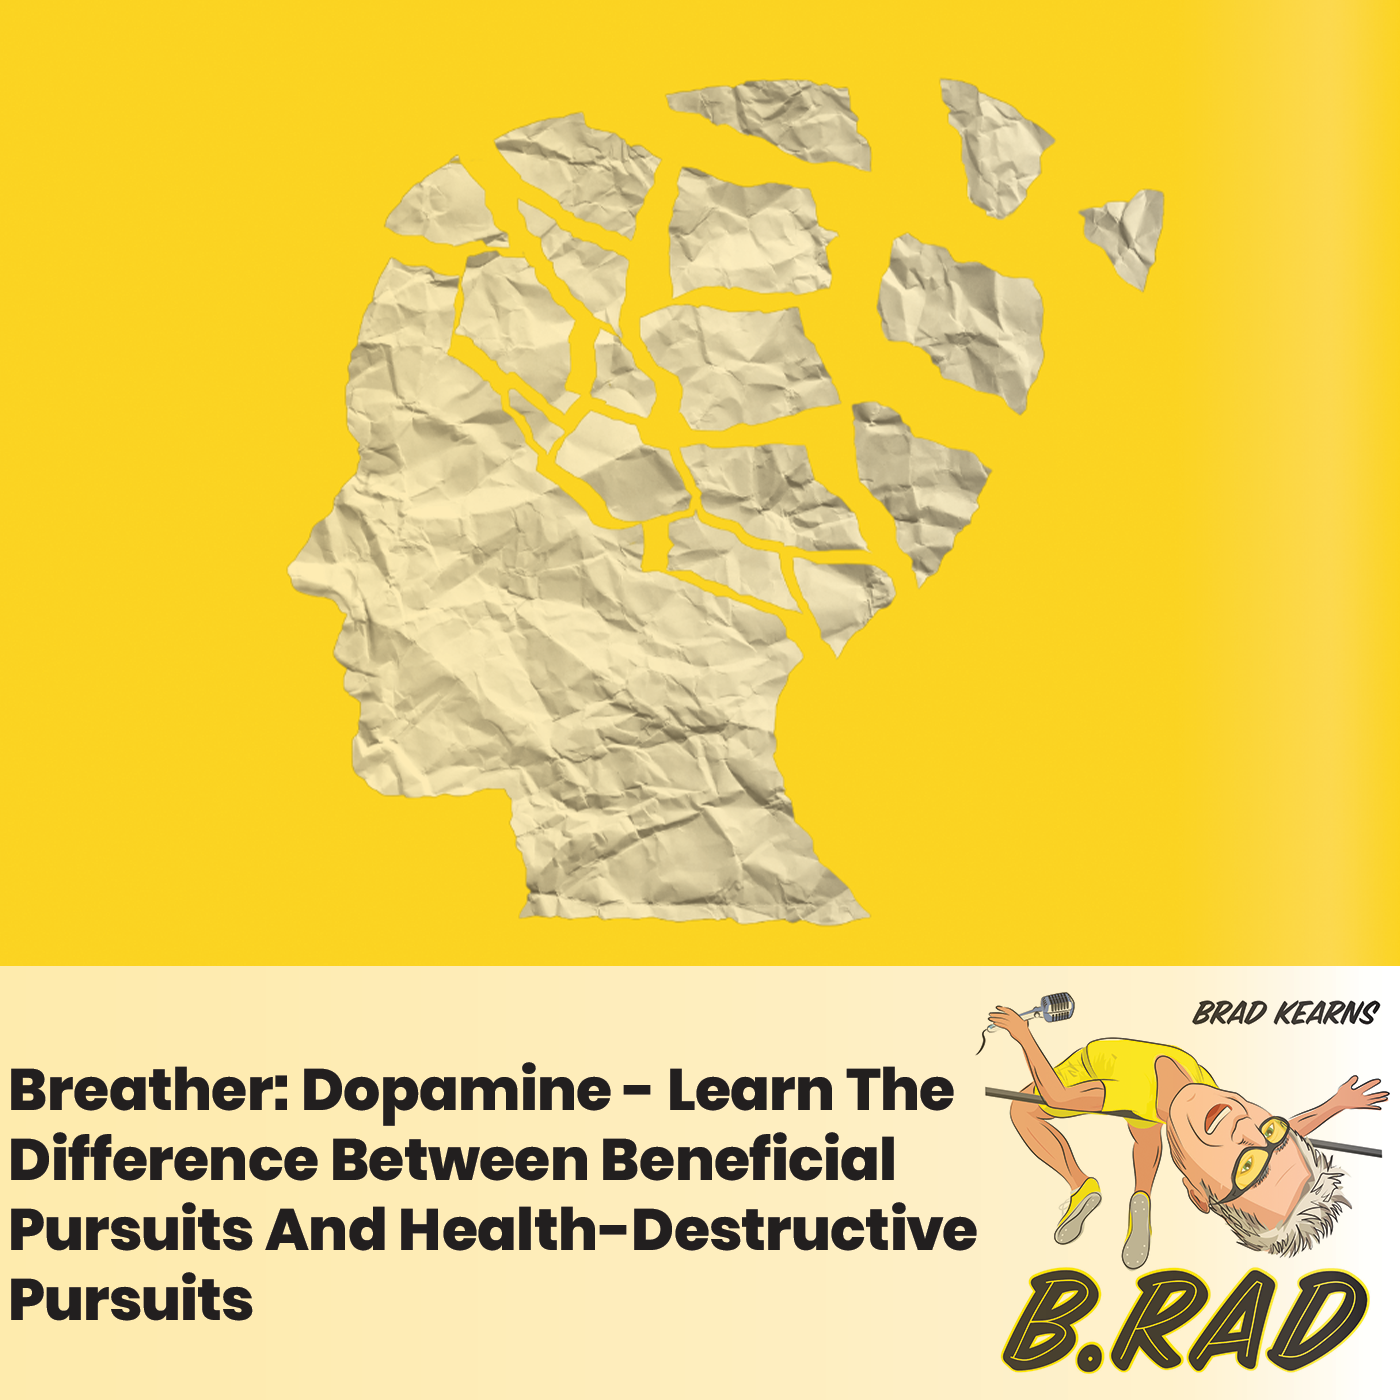 Breather: Dopamine - Learn The Difference Between Beneficial Pursuits And Health-Destructive Pursuits